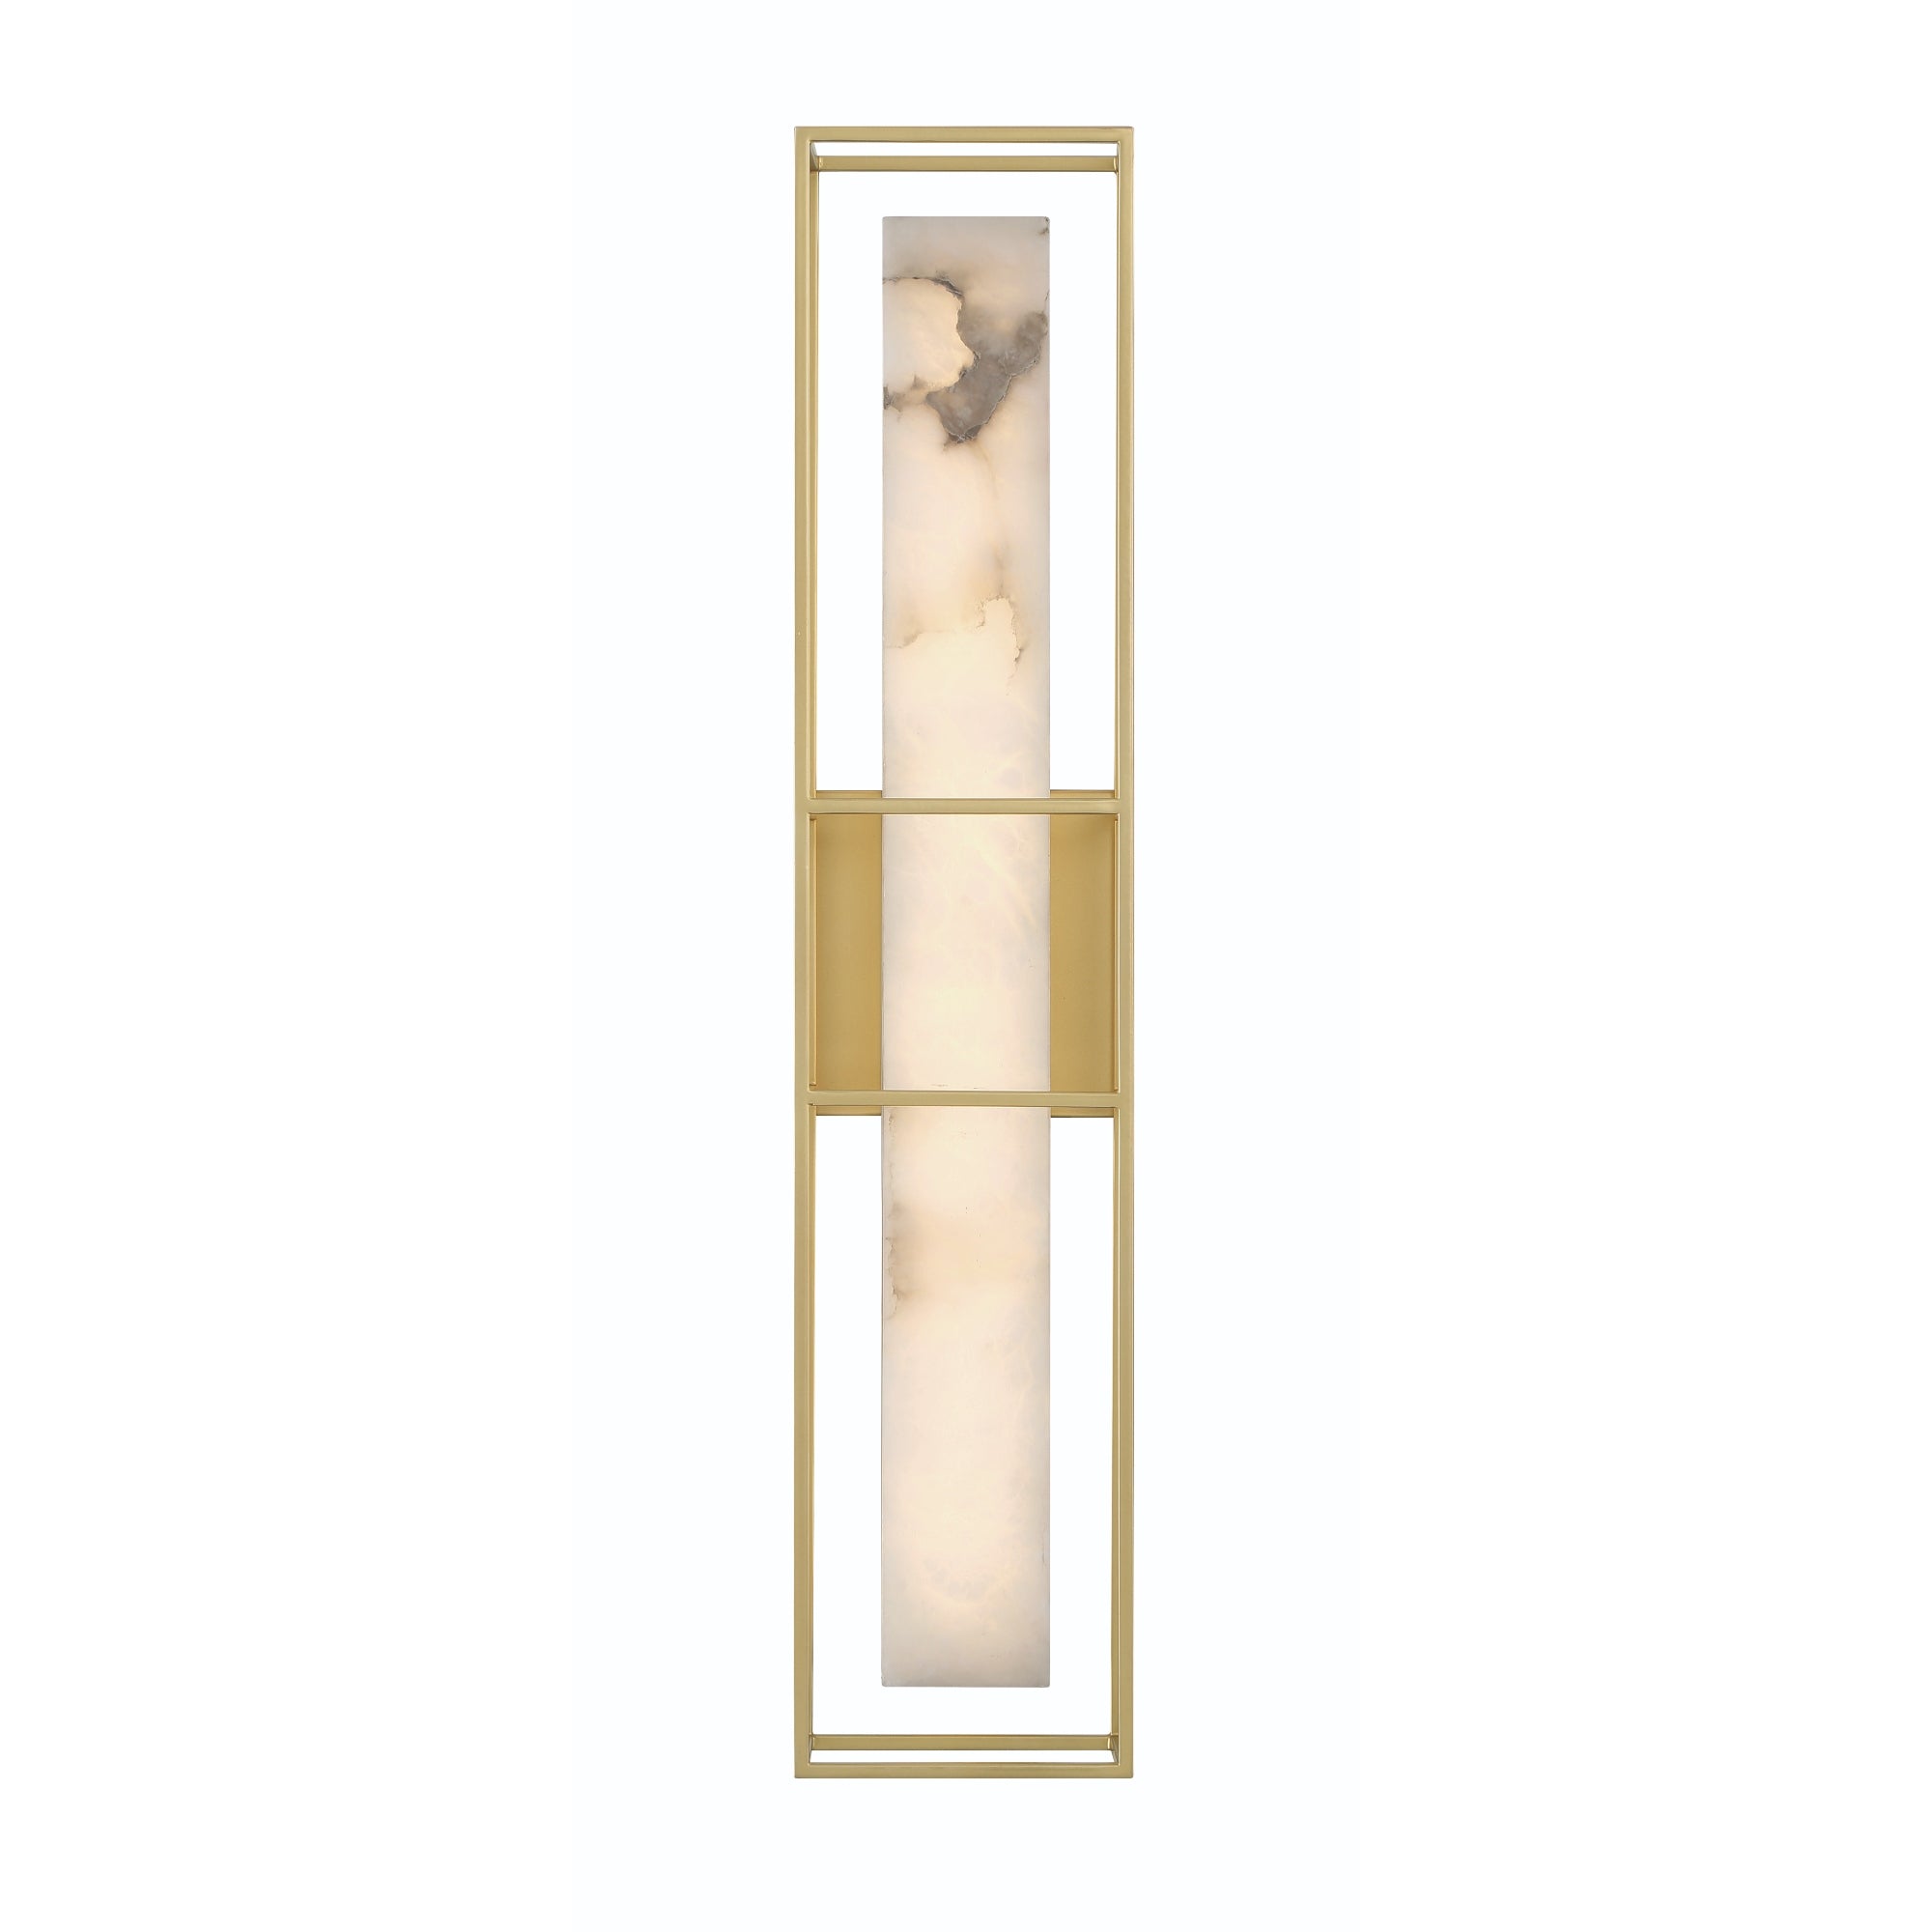 BLAKLEY Wall sconce Gold INTEGRATED LED - 46838-025 | EUROFASE